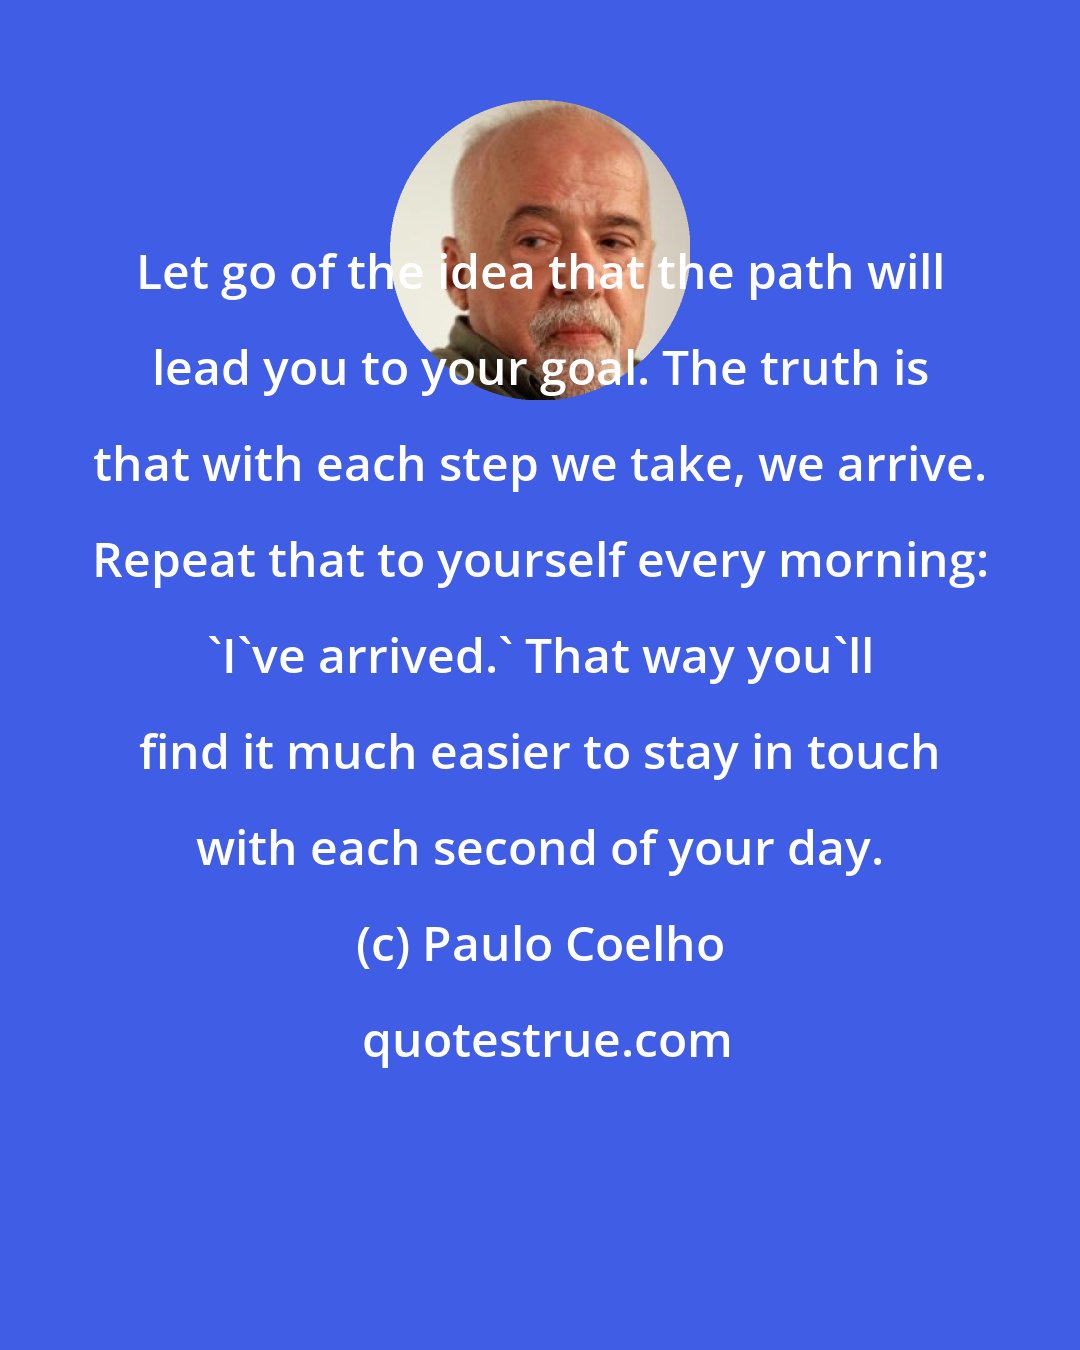 Paulo Coelho: Let go of the idea that the path will lead you to your goal. The truth is that with each step we take, we arrive. Repeat that to yourself every morning: 'I've arrived.' That way you'll find it much easier to stay in touch with each second of your day.